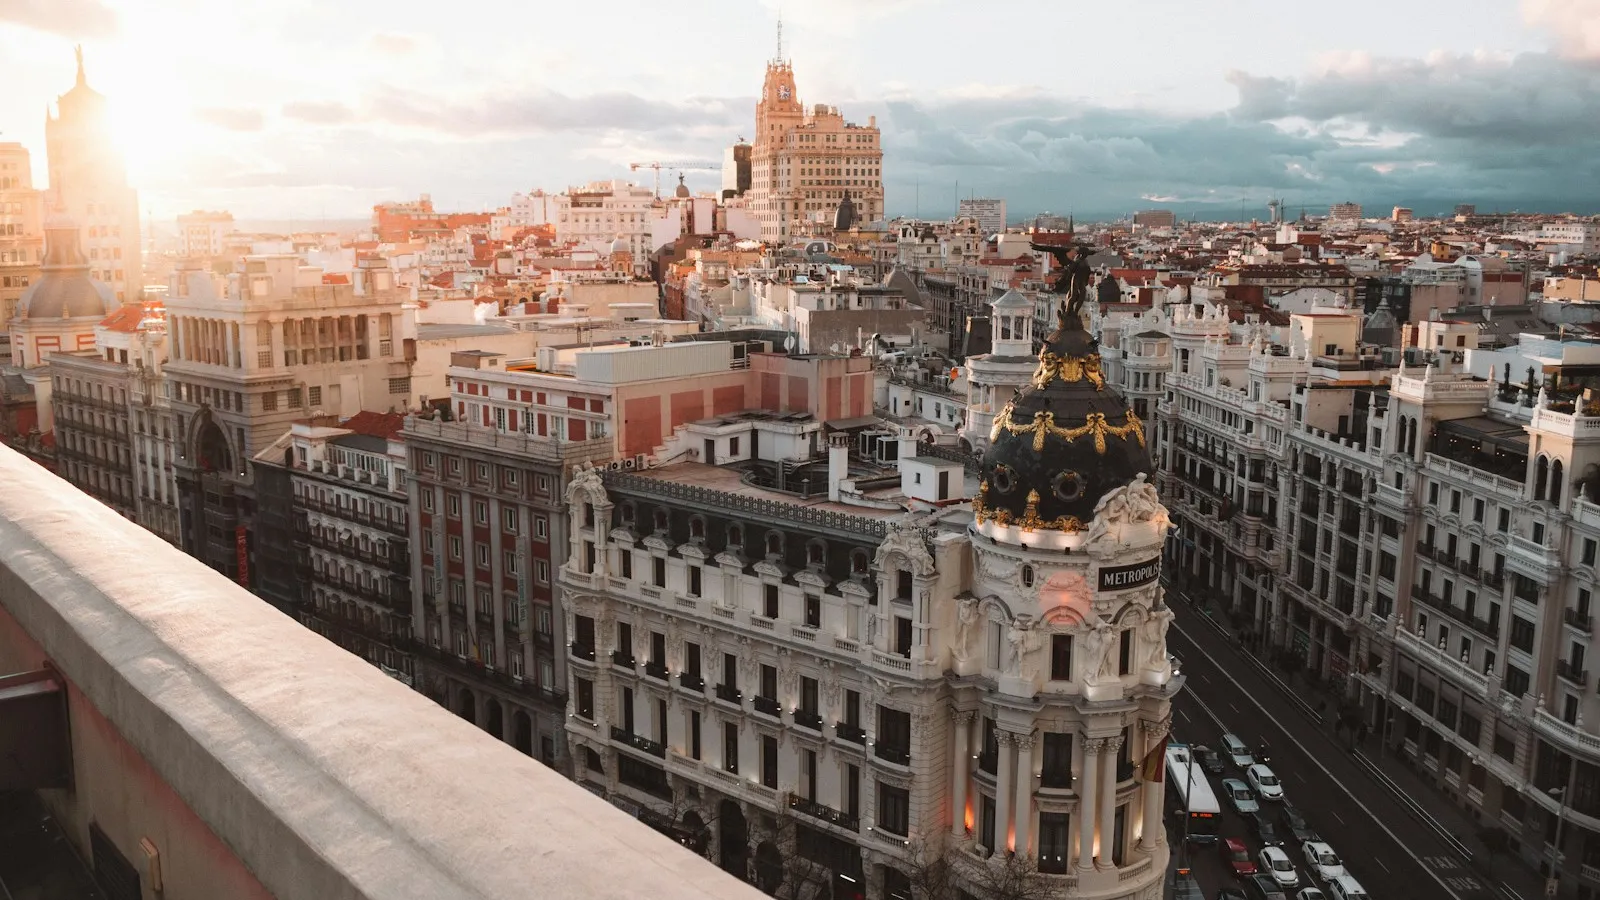 Madrid is a top tourist destination, but visitors should beware of common scams like taxi meter rigging, pickpockets, and fake petitions targeting tourists.